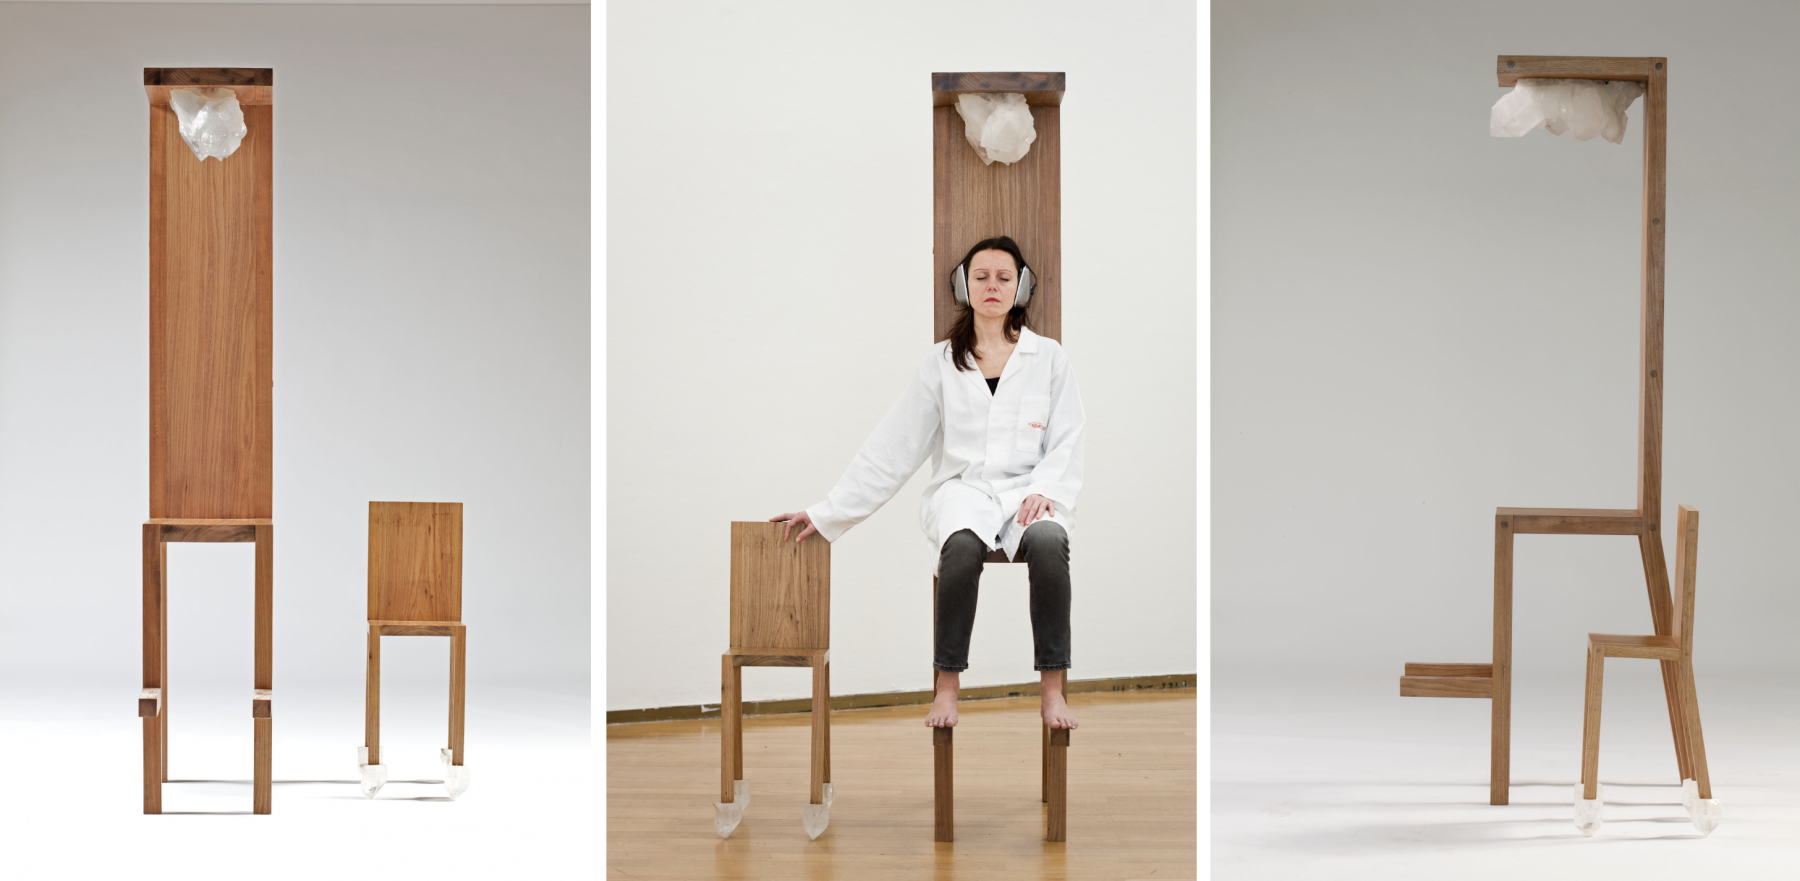 Chair for Human Use with Chair for Spirit Use IV,&amp;nbsp;2015, wood, quartz crystal, 80.7 x 13.8 x 17.17 inches, unique